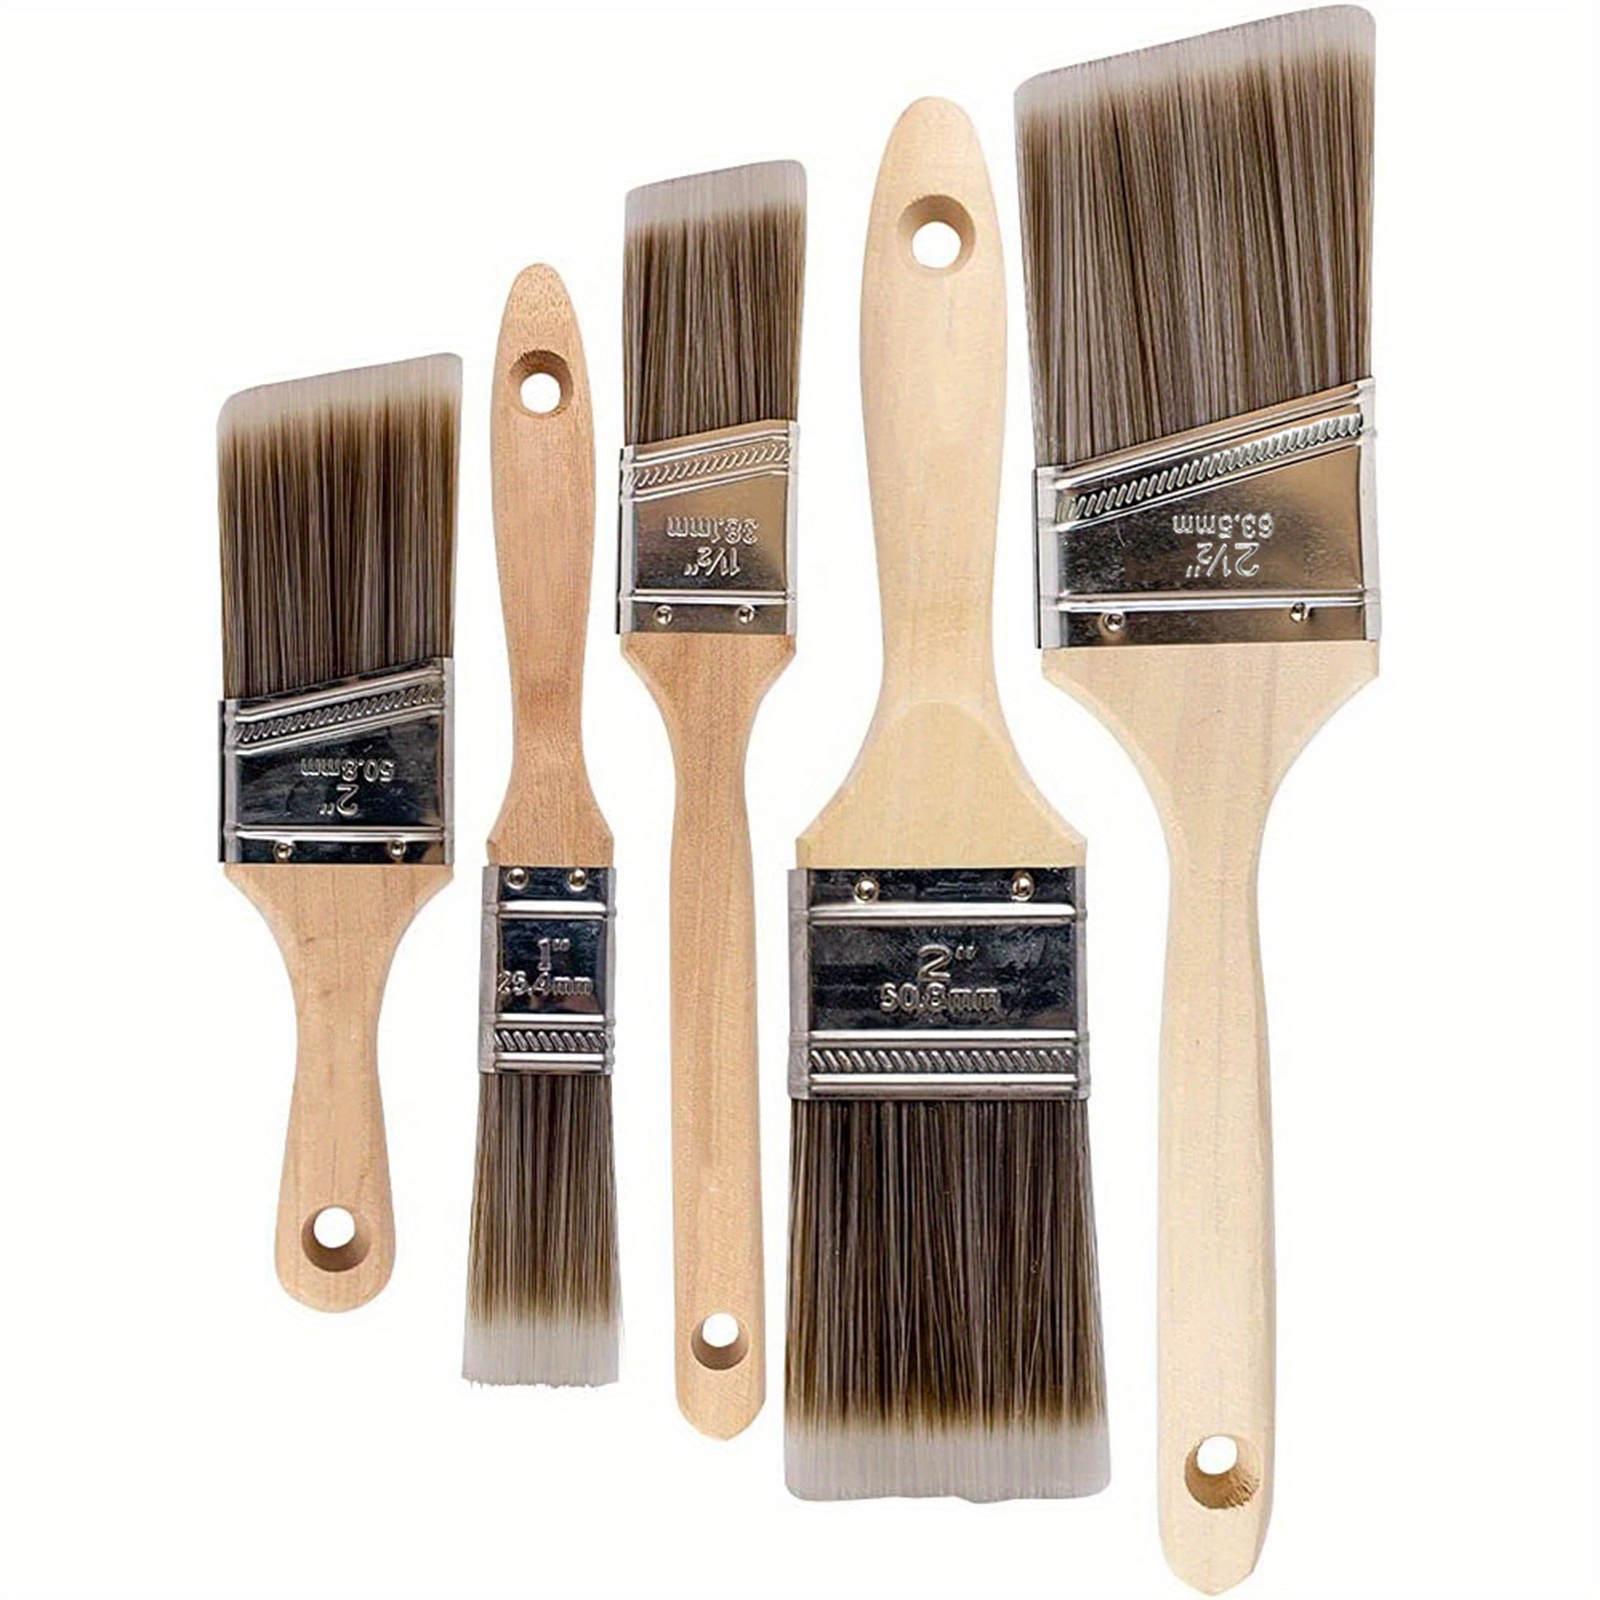 2 in. Angle Paint Brush, GOOD Quality